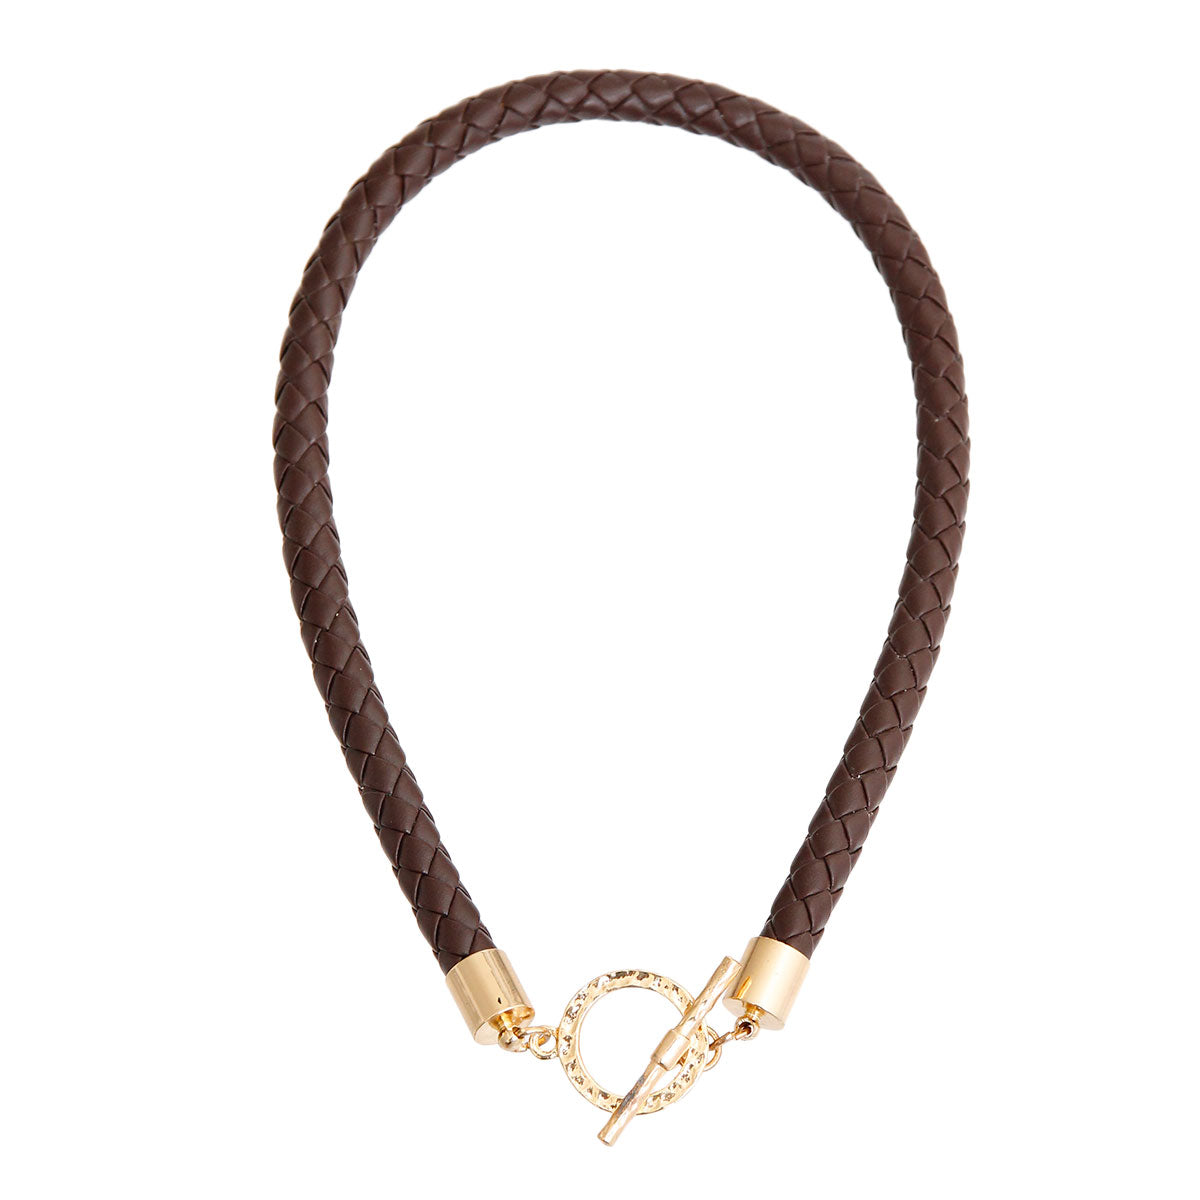 Brown Leather Braided Choker